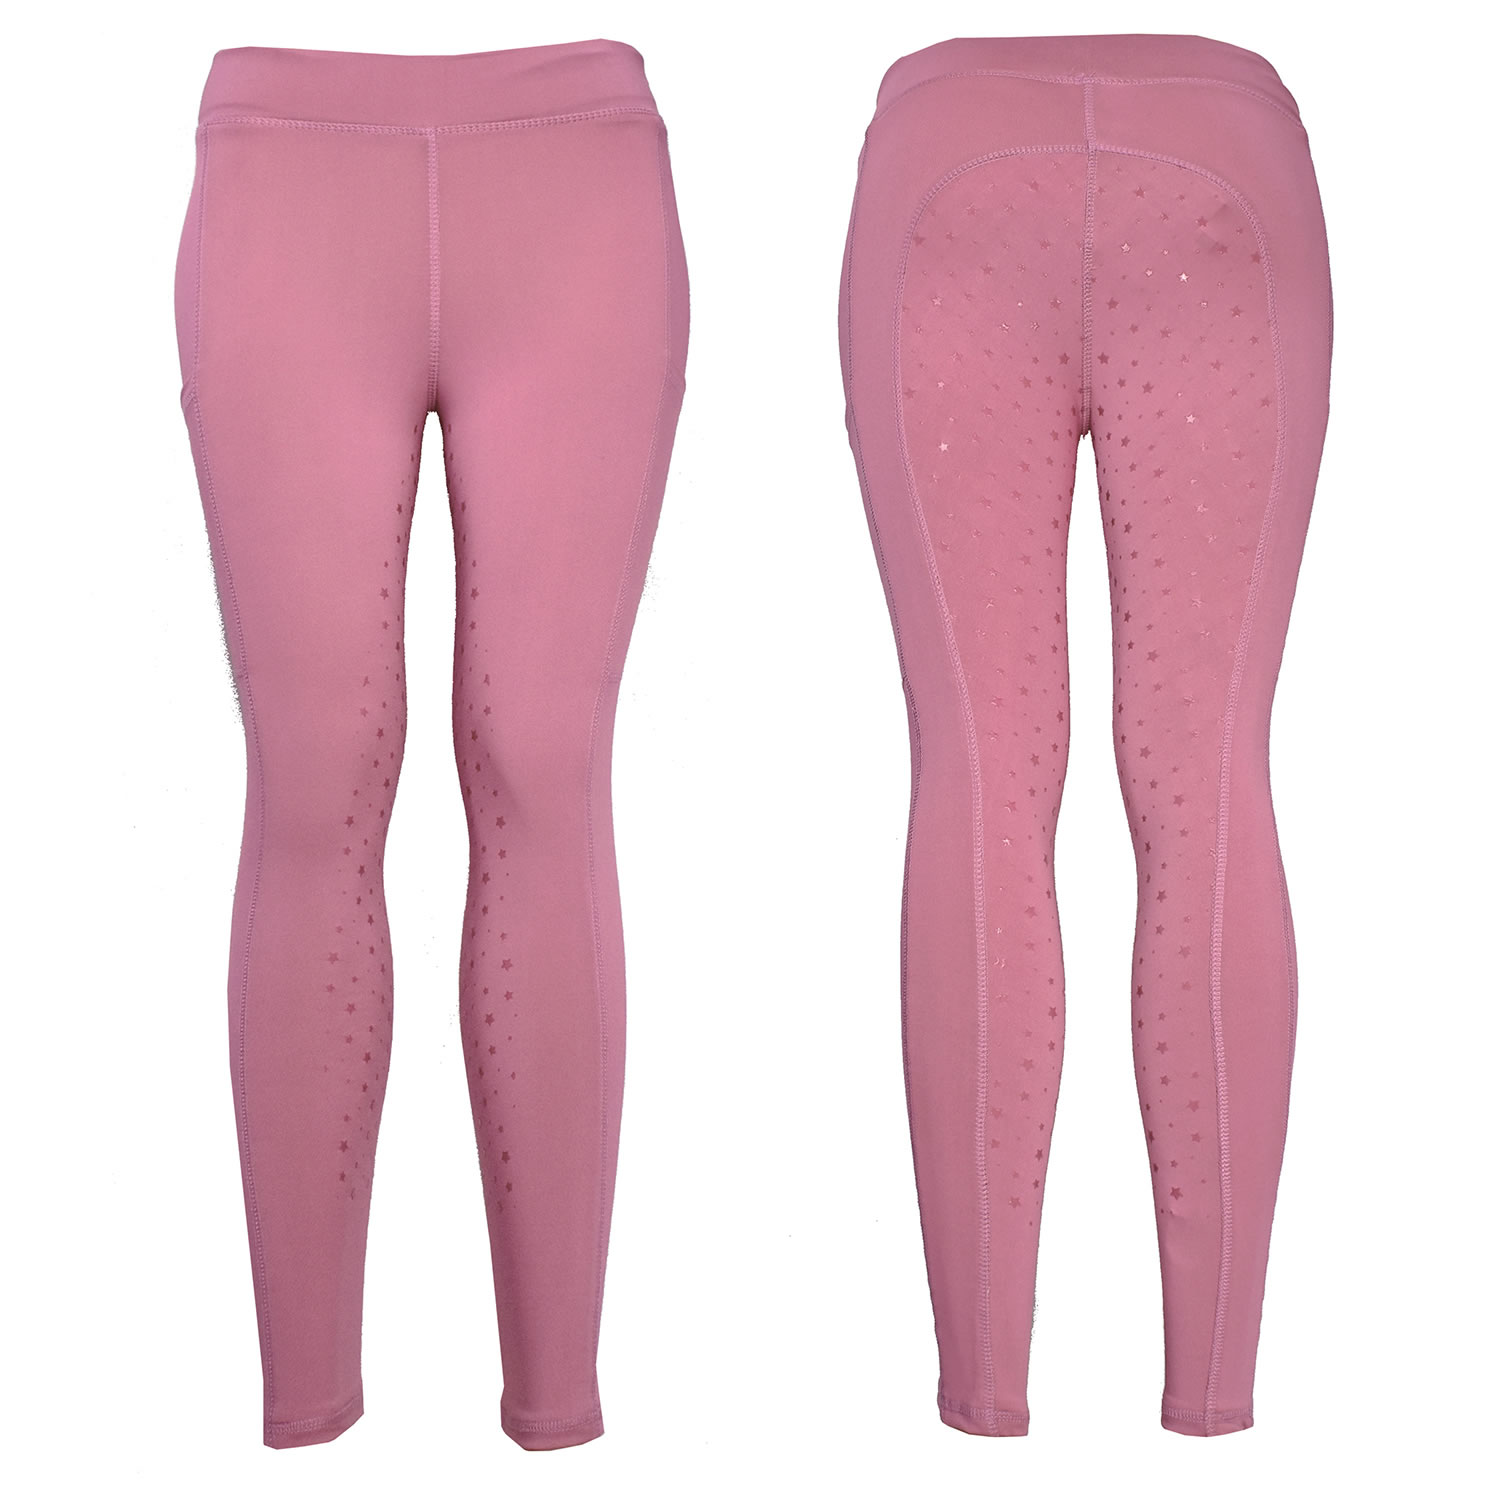 WHITAKER LACEBY RIDING TIGHTS CHILD PINK  AGE 9 - 10 CHILD